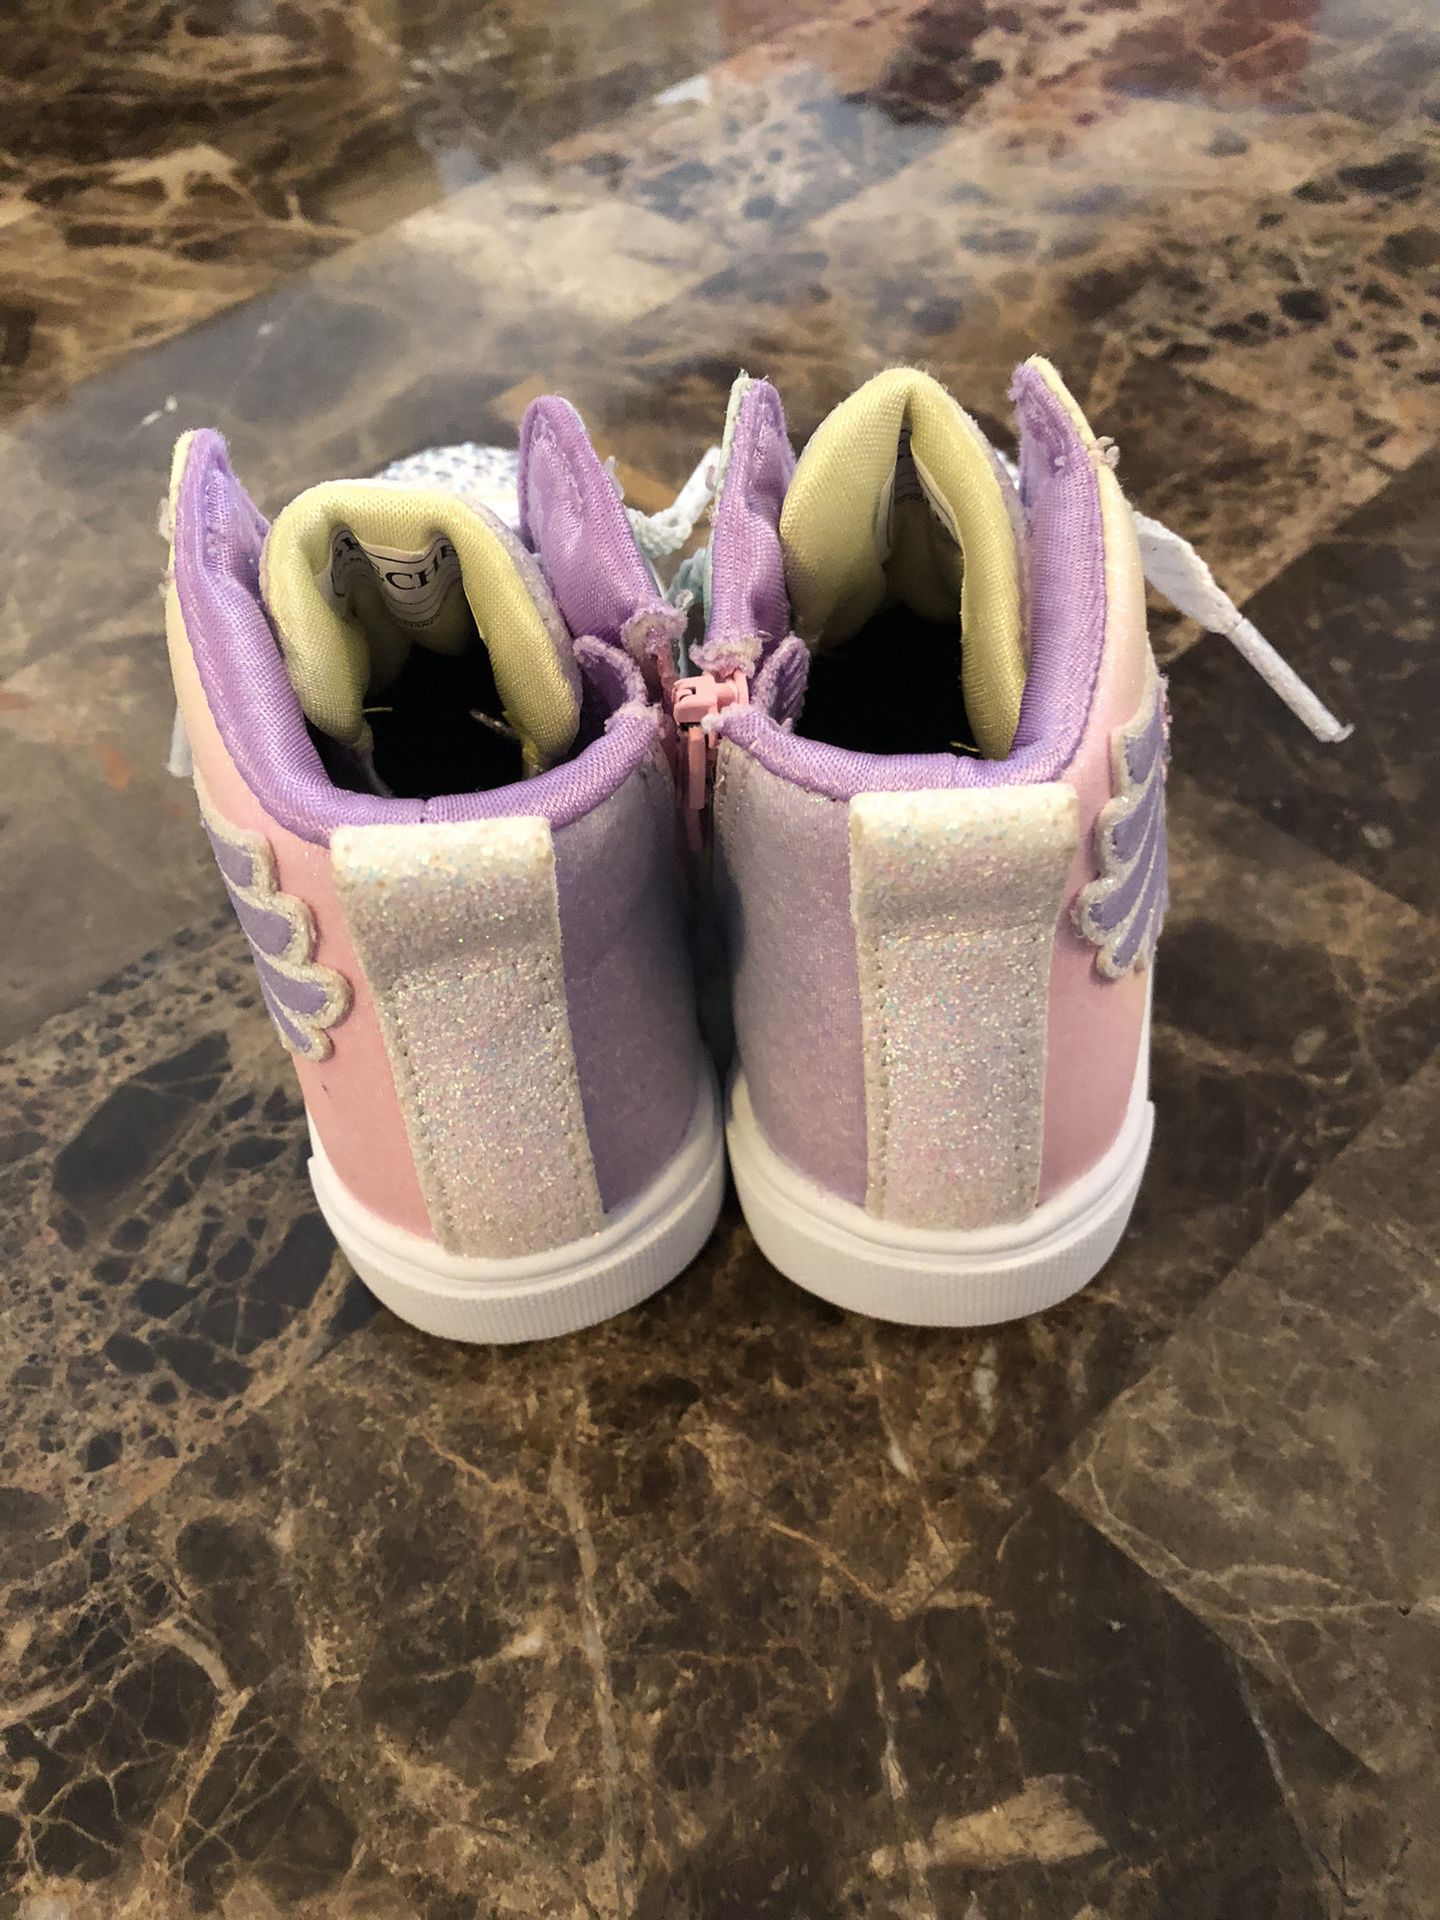 Sketchers Twinkle Toes Toddler Shoes From Macy’s 